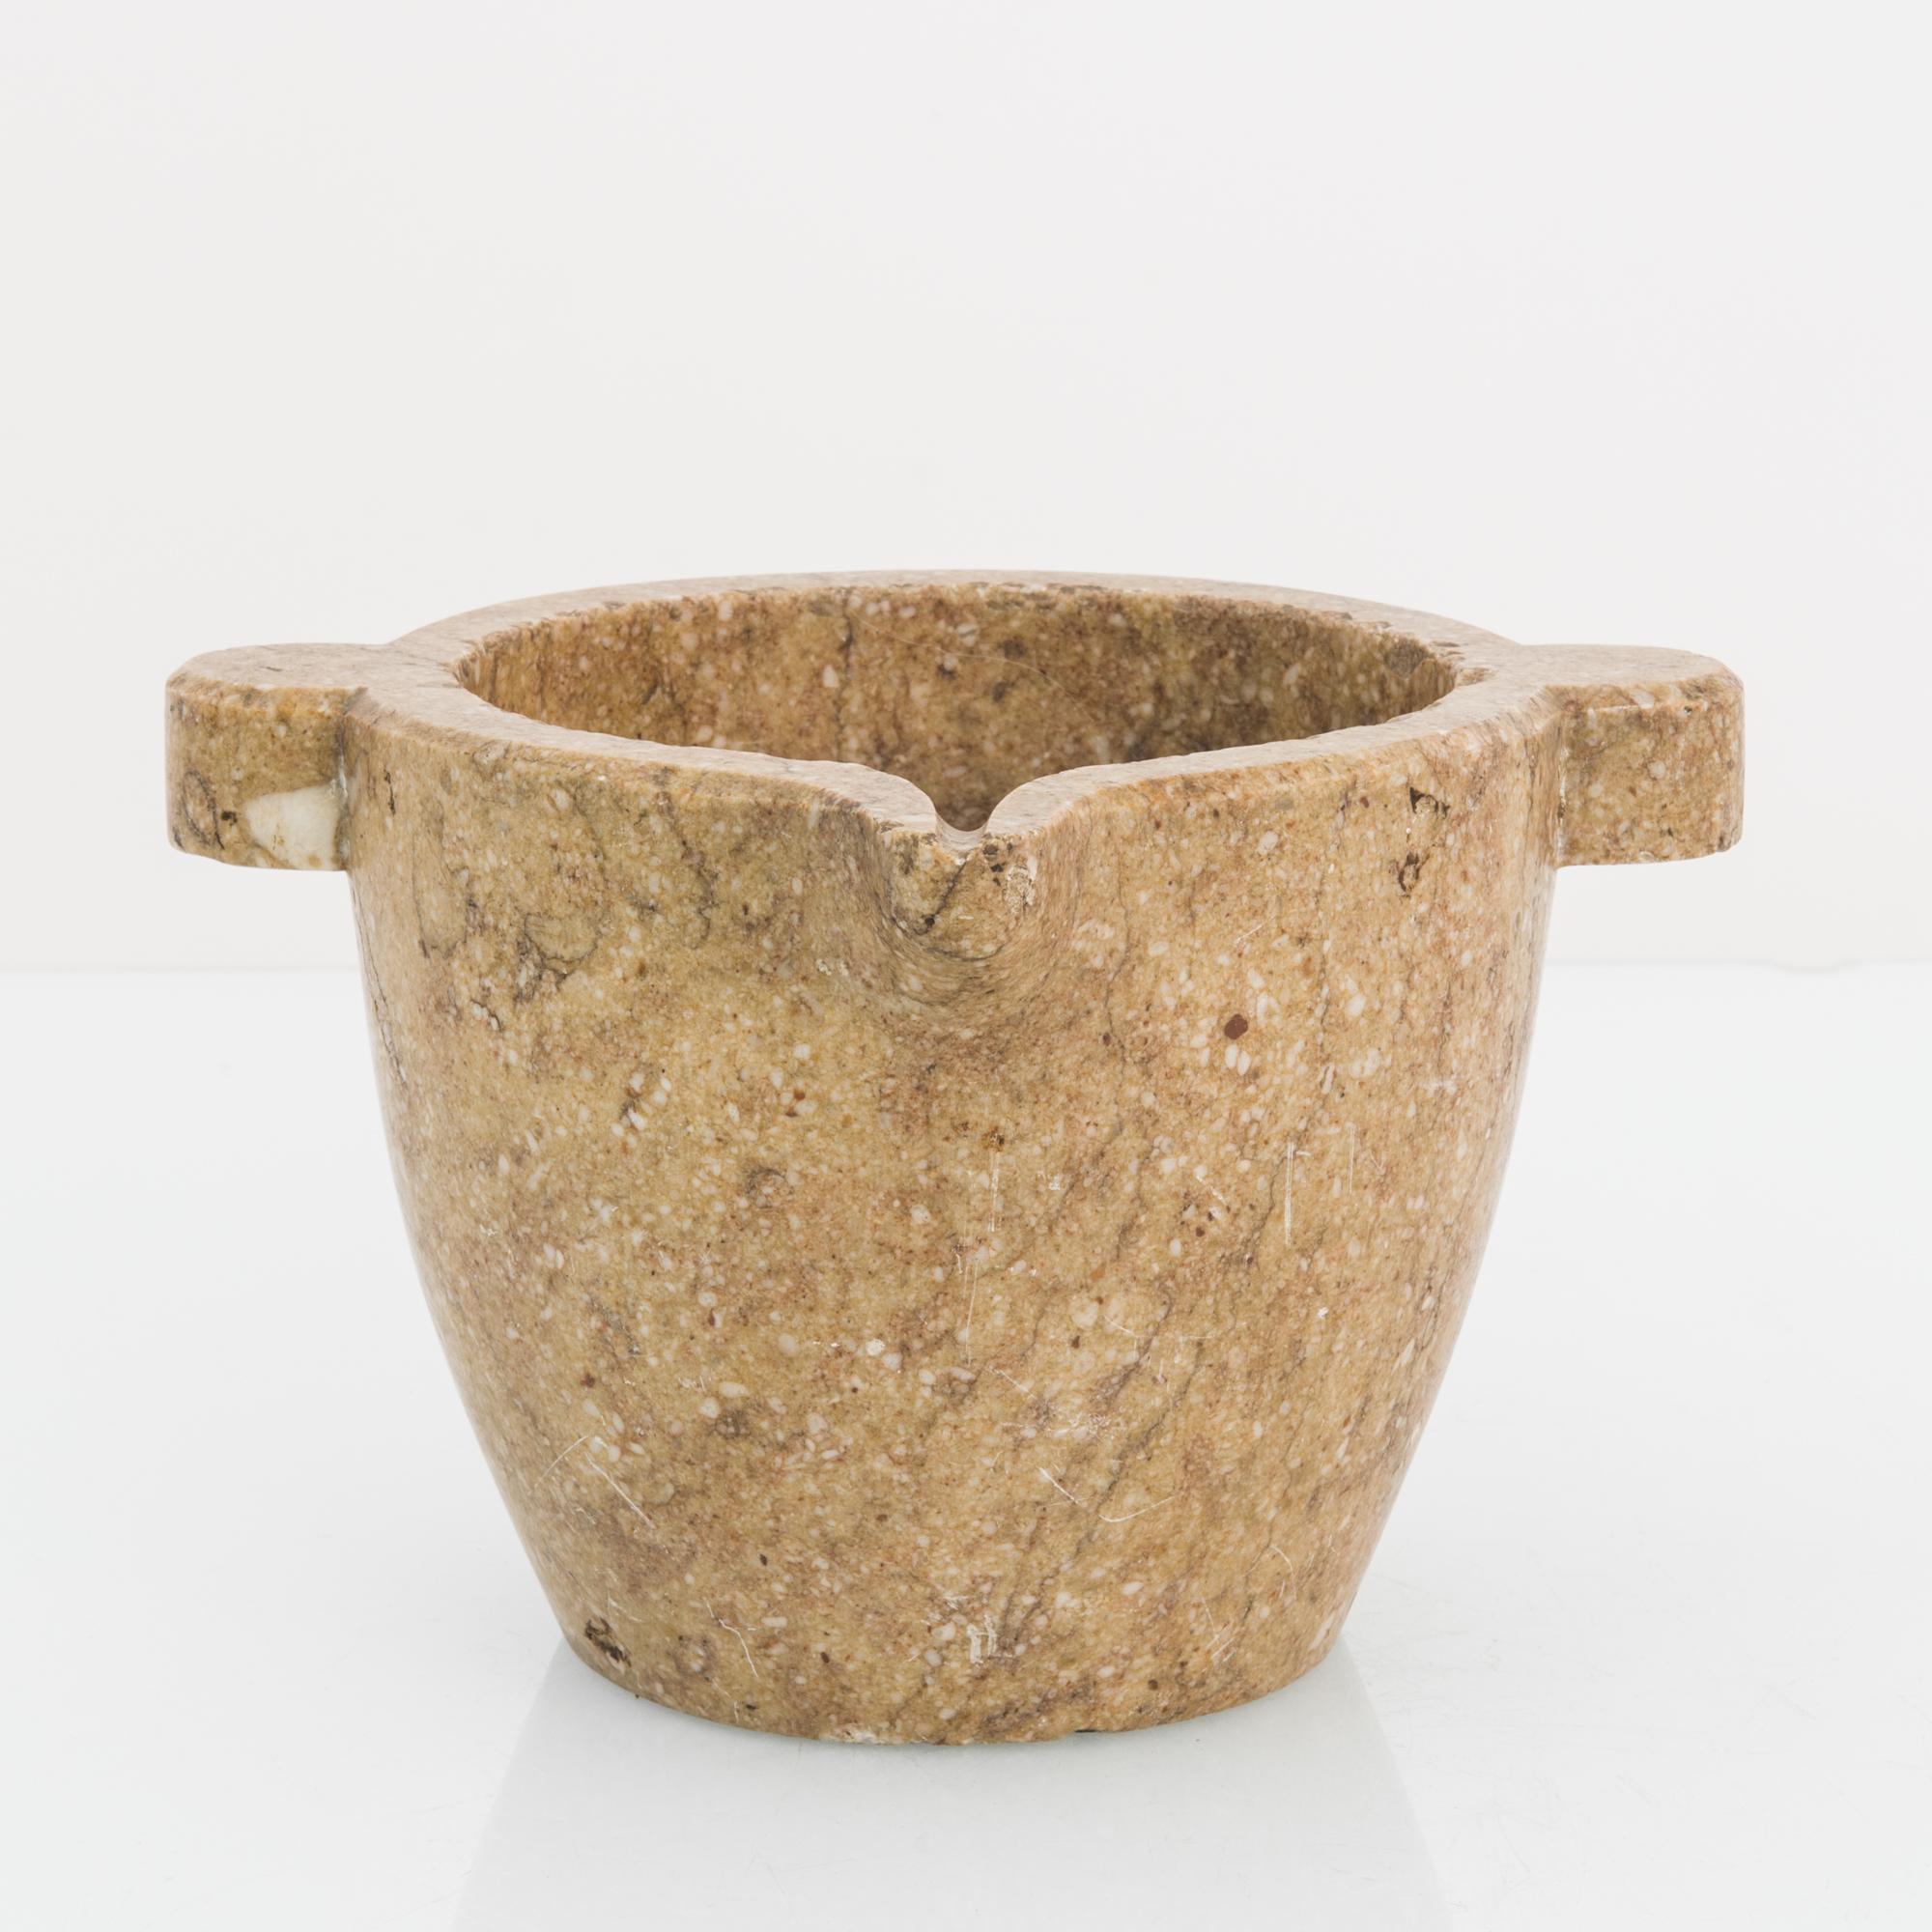 A stone mortar from France, circa 1800. Rustic and refined, the mortar is shaped from a single piece of caramel beige marble; the textural quality of the stone gifts it an immediate tactile appeal. Two stout handles around the rim lend a cardinal